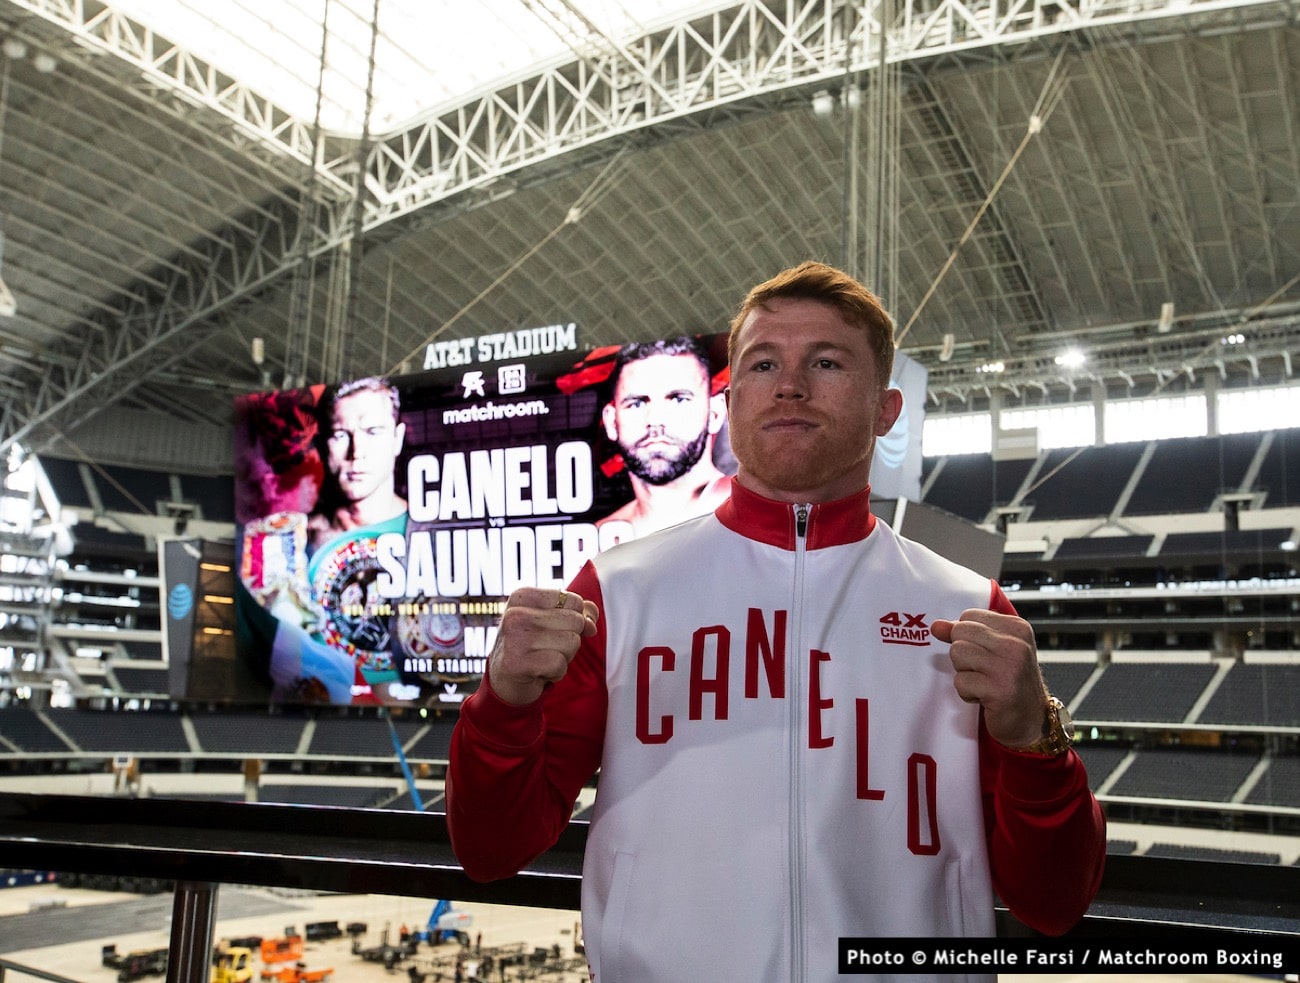 Image: Canelo vs. Plant: Alvarez receives draft contract for September 18th fight on Fox pay-per-view